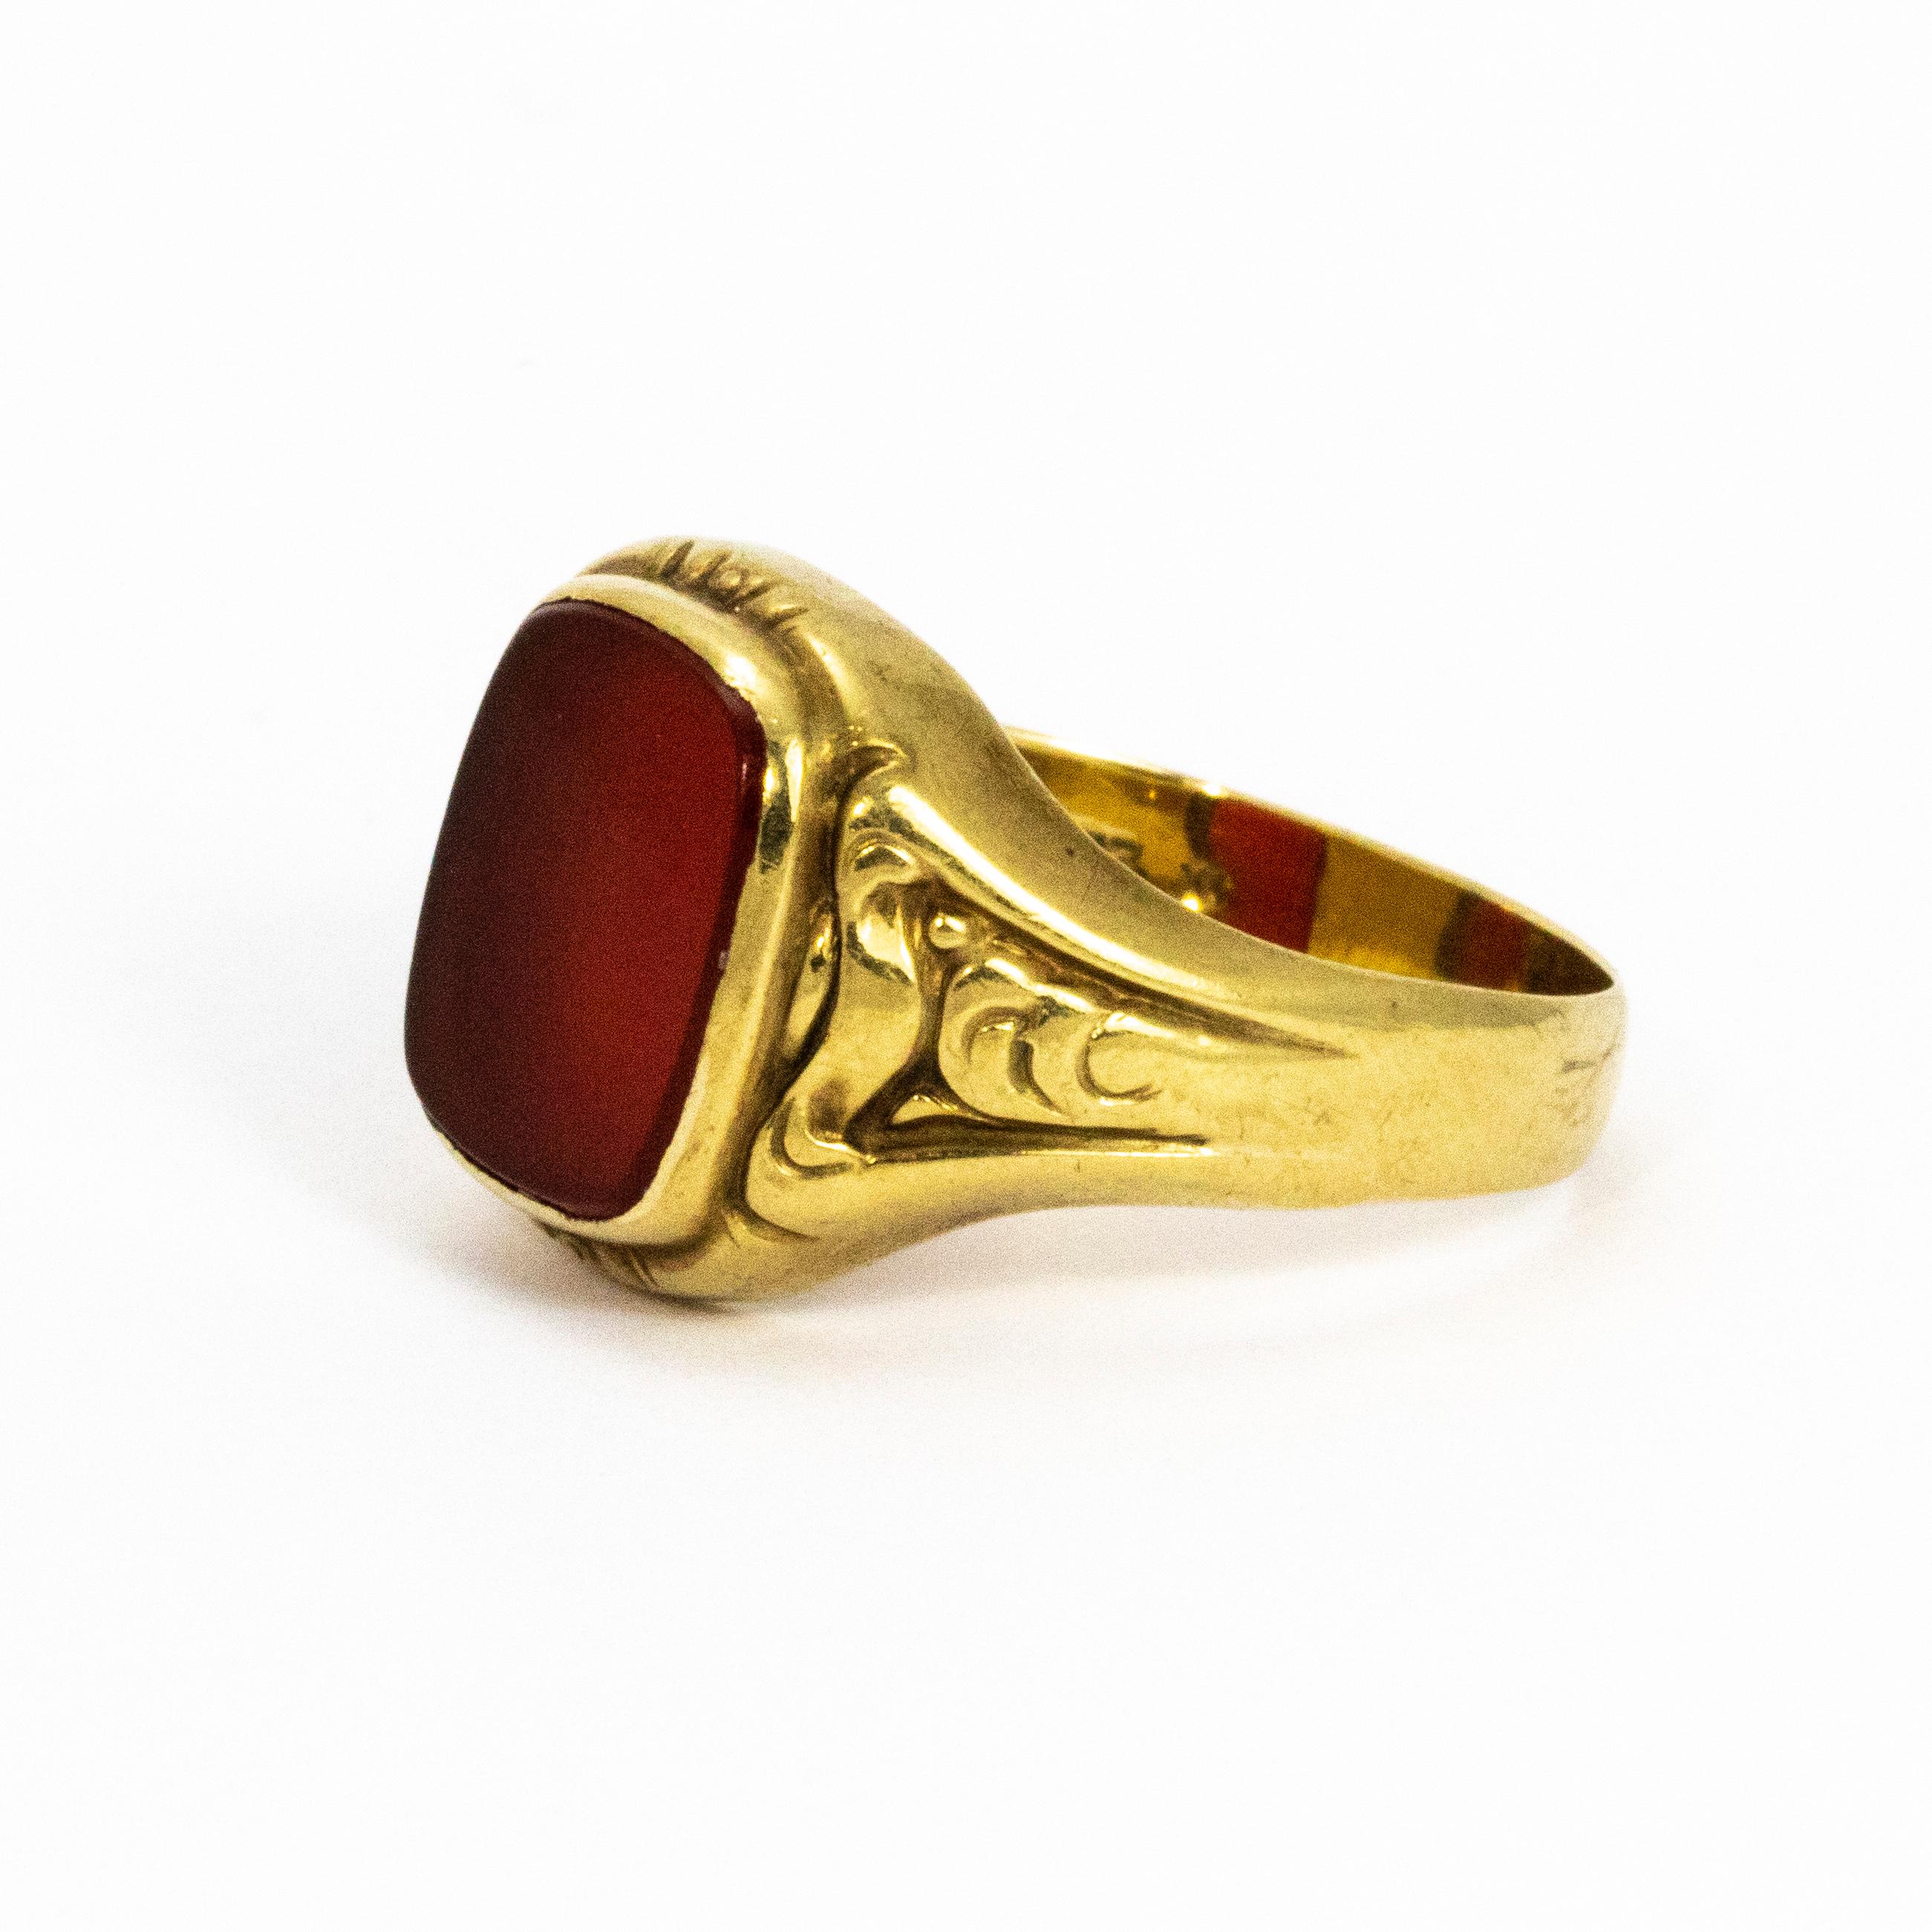 Glossy Carnelian stone set in a decorative 8ct gold band.

Ring Size: S 1/2 or 9 1/2